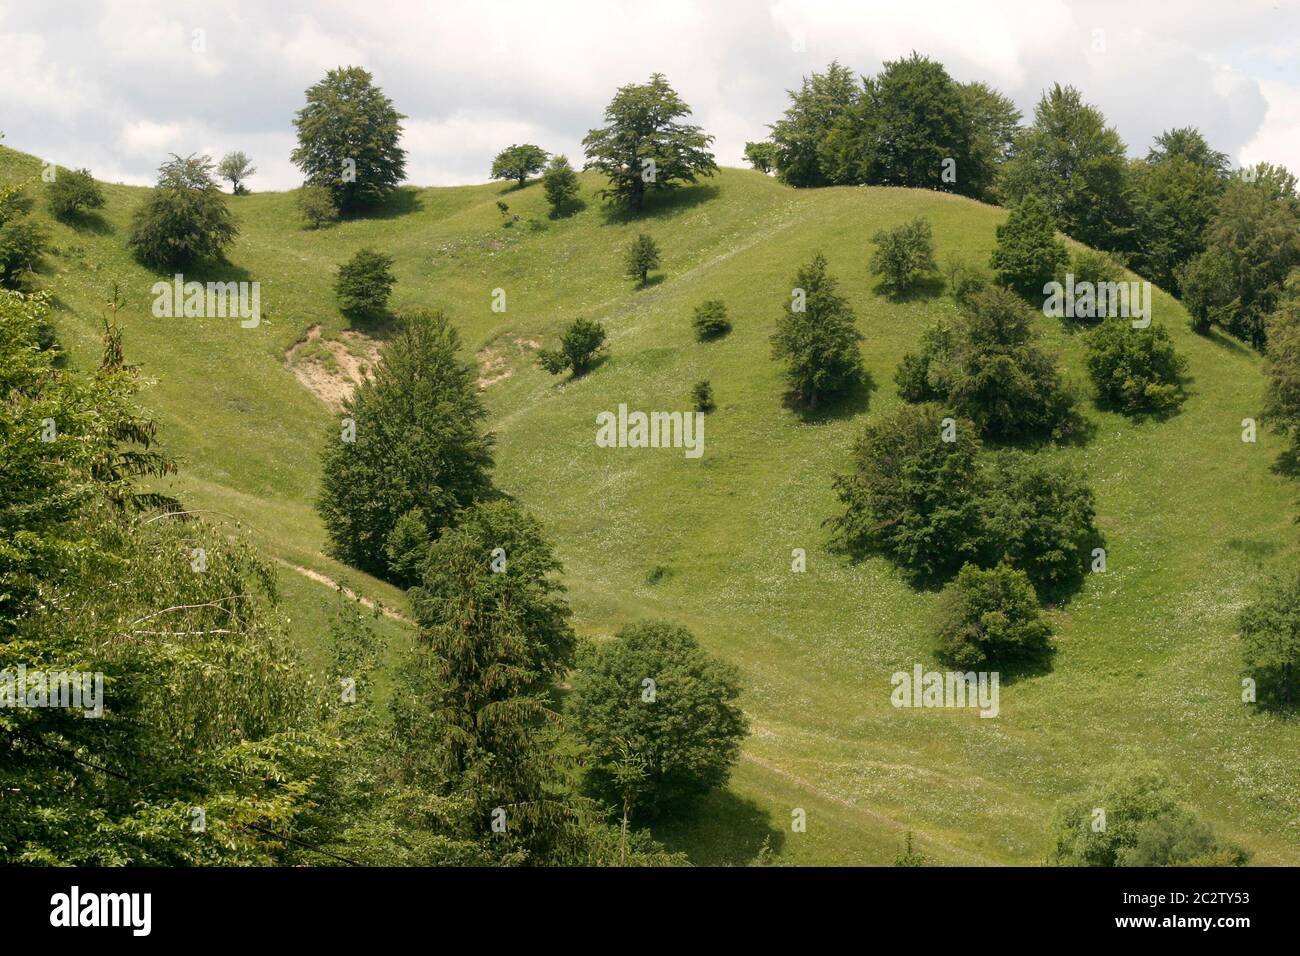 Trees and shrubs growing on pasture land on a hill in Moldova, Romania. Stock Photo